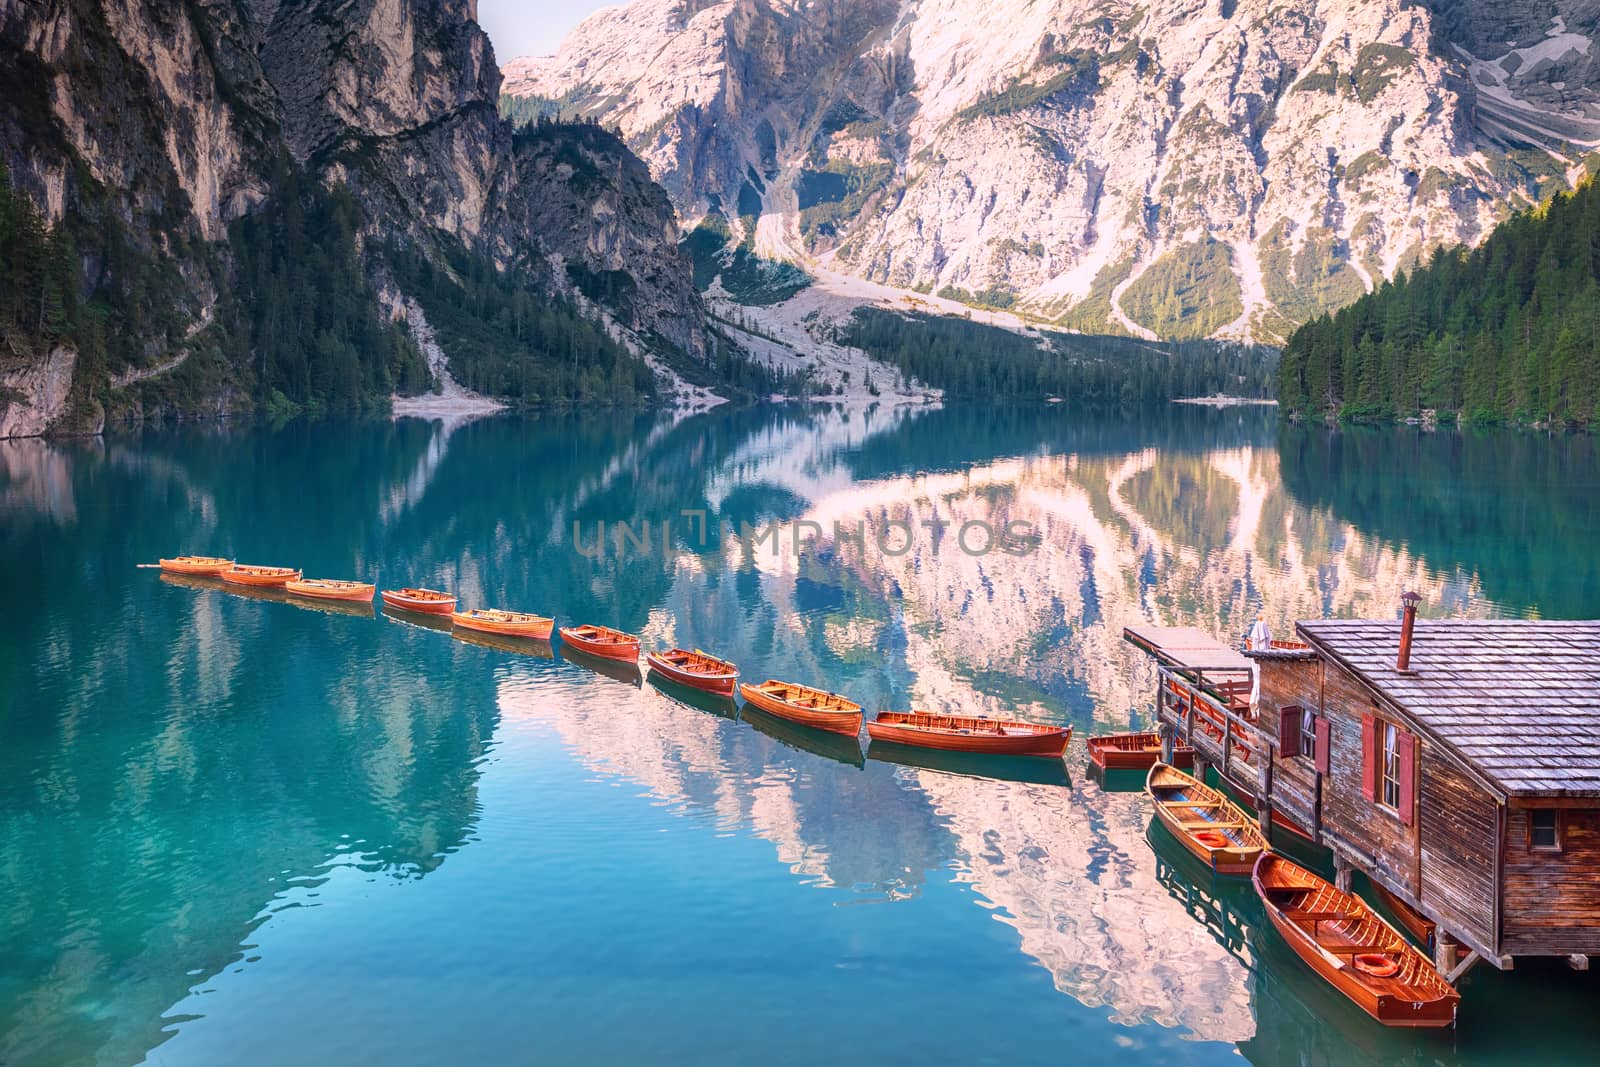 Wooden boats in a row on summer morning at Lago di Braies (also known as Pragser Wildsee) in Dolomites Mountains, Sudtirol, Italy.